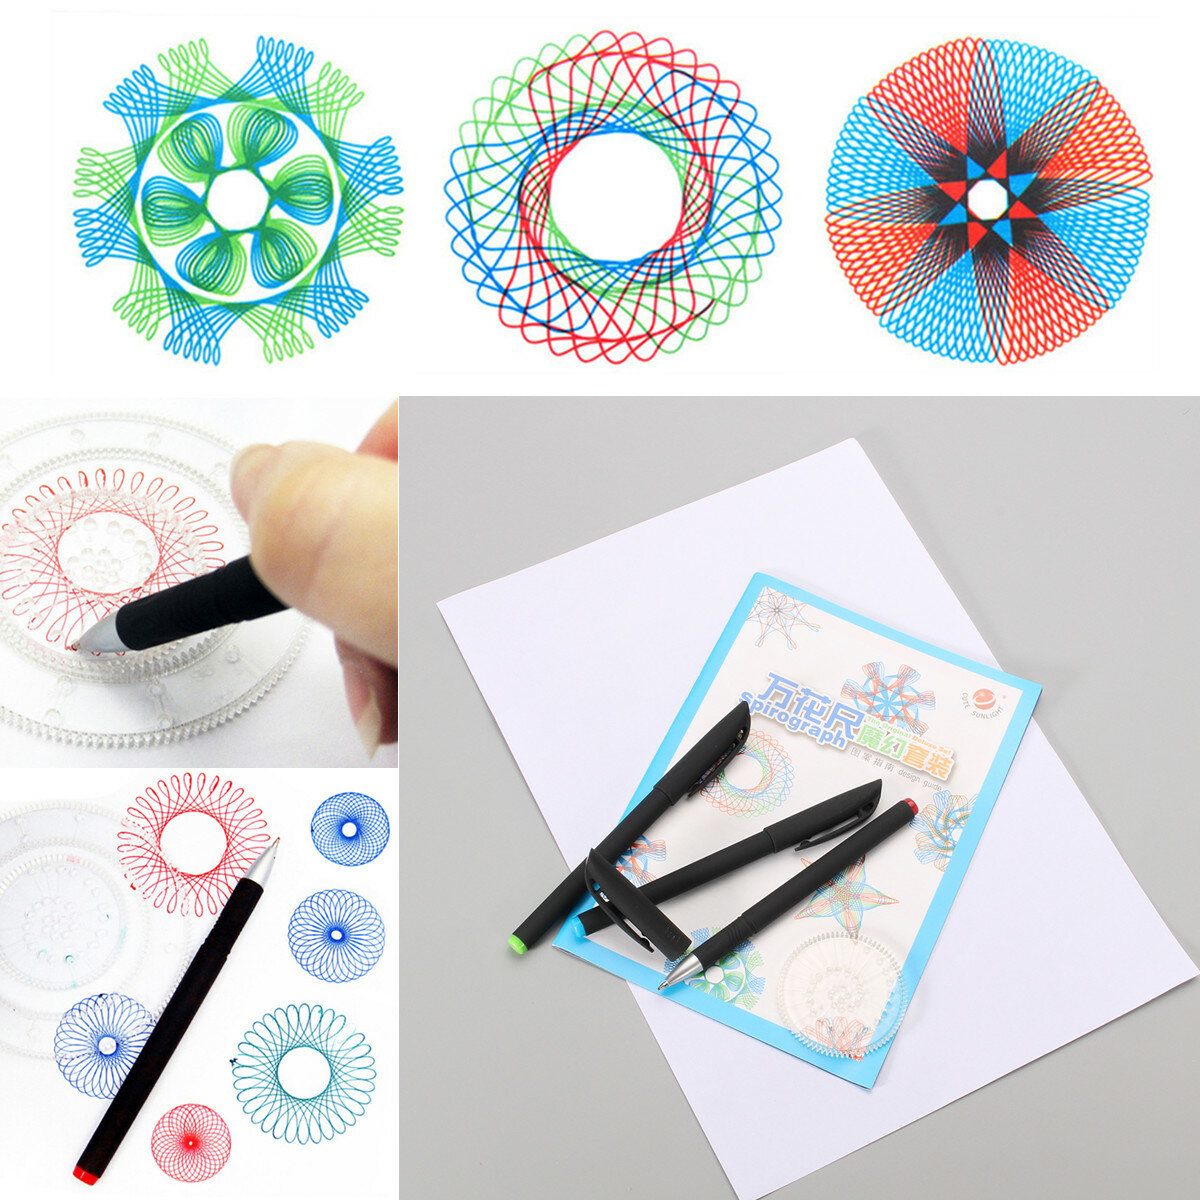 25Pcs Spirograph Deluxe Design Set Creative Drawing Spirograph Original Design Cyclex Shapes Kit for